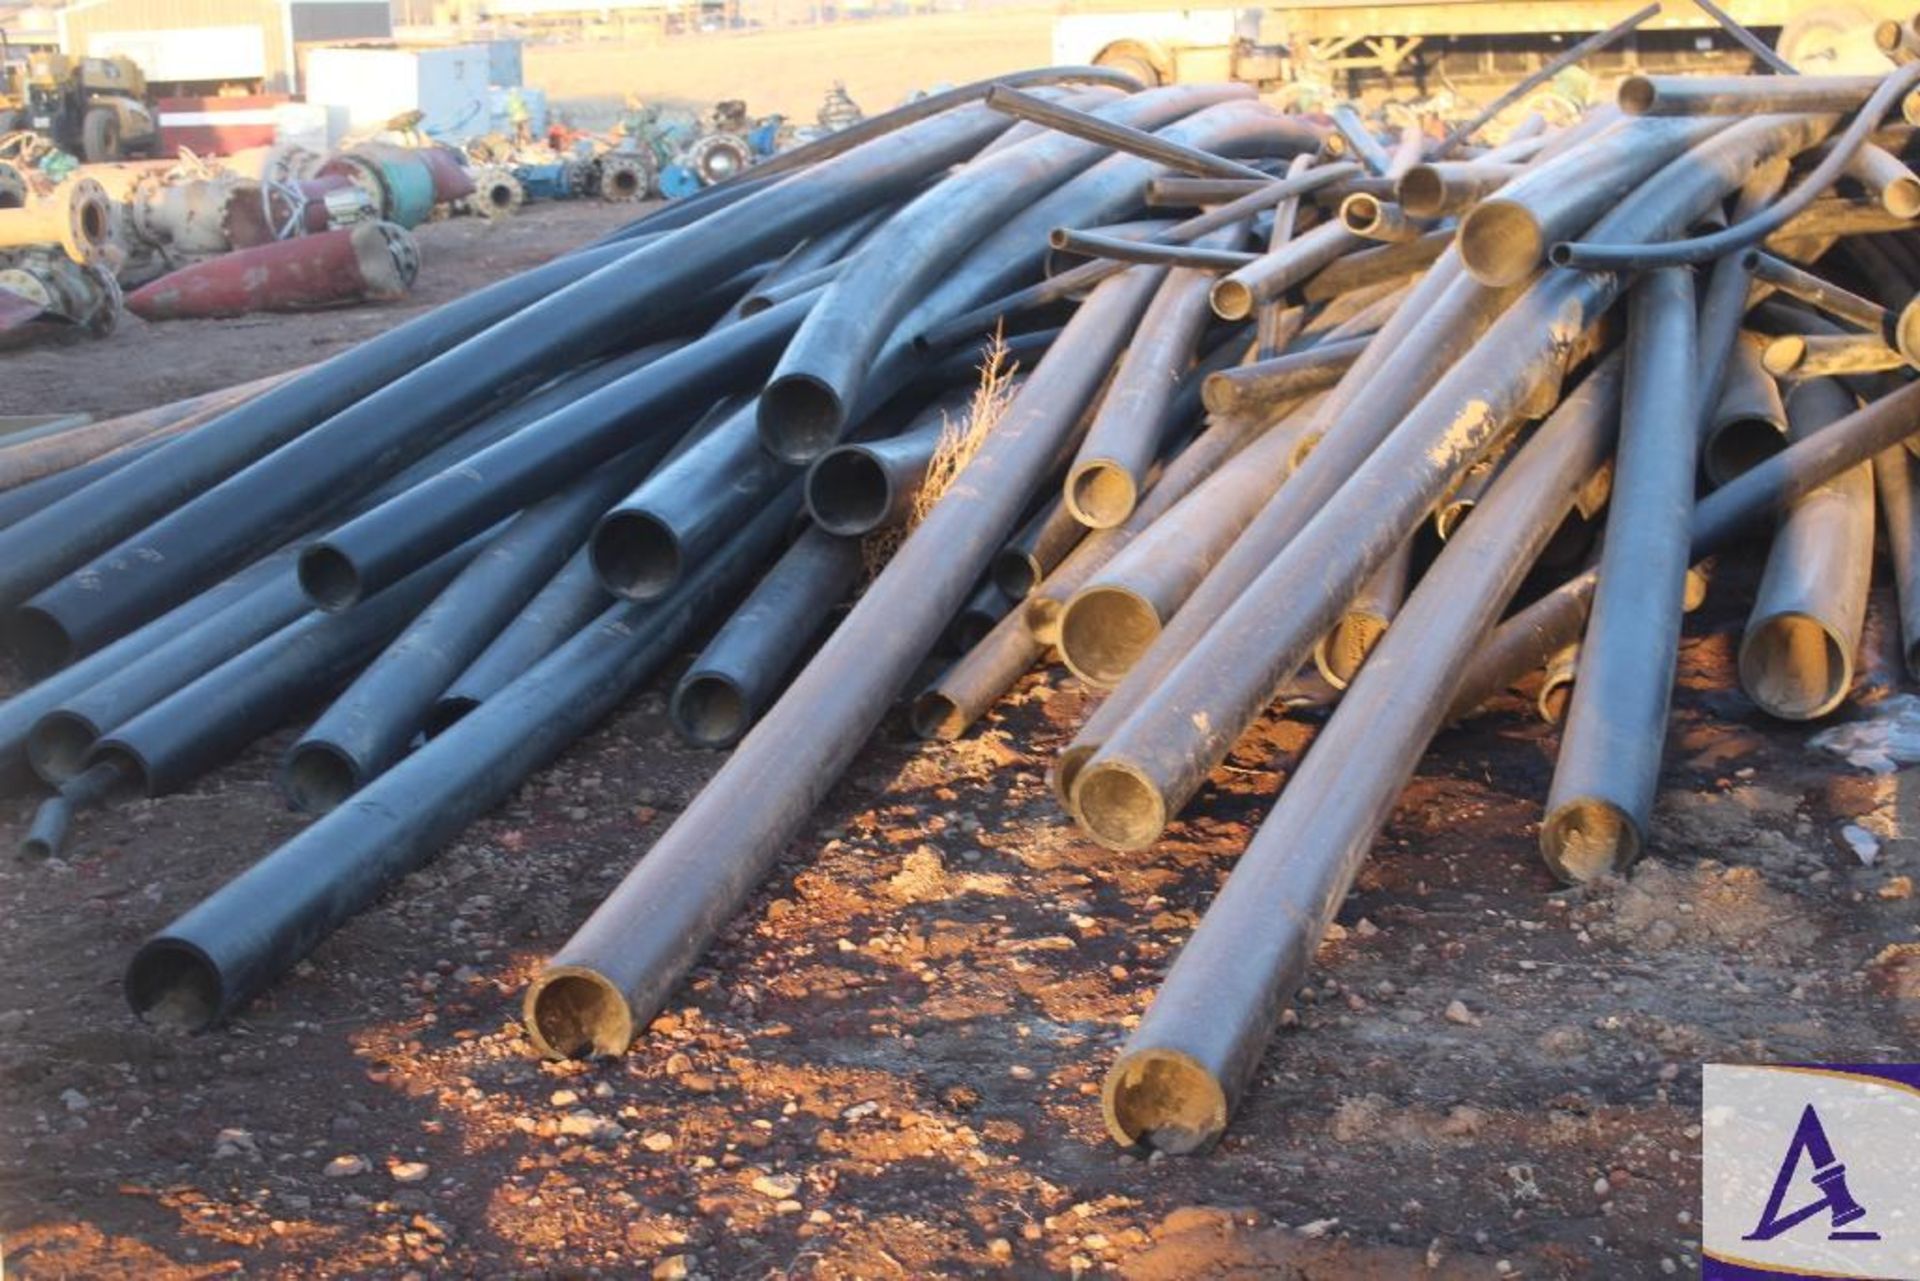 HDPE Poly Assorted pipes 2", 4", 6", 8" - Image 2 of 6